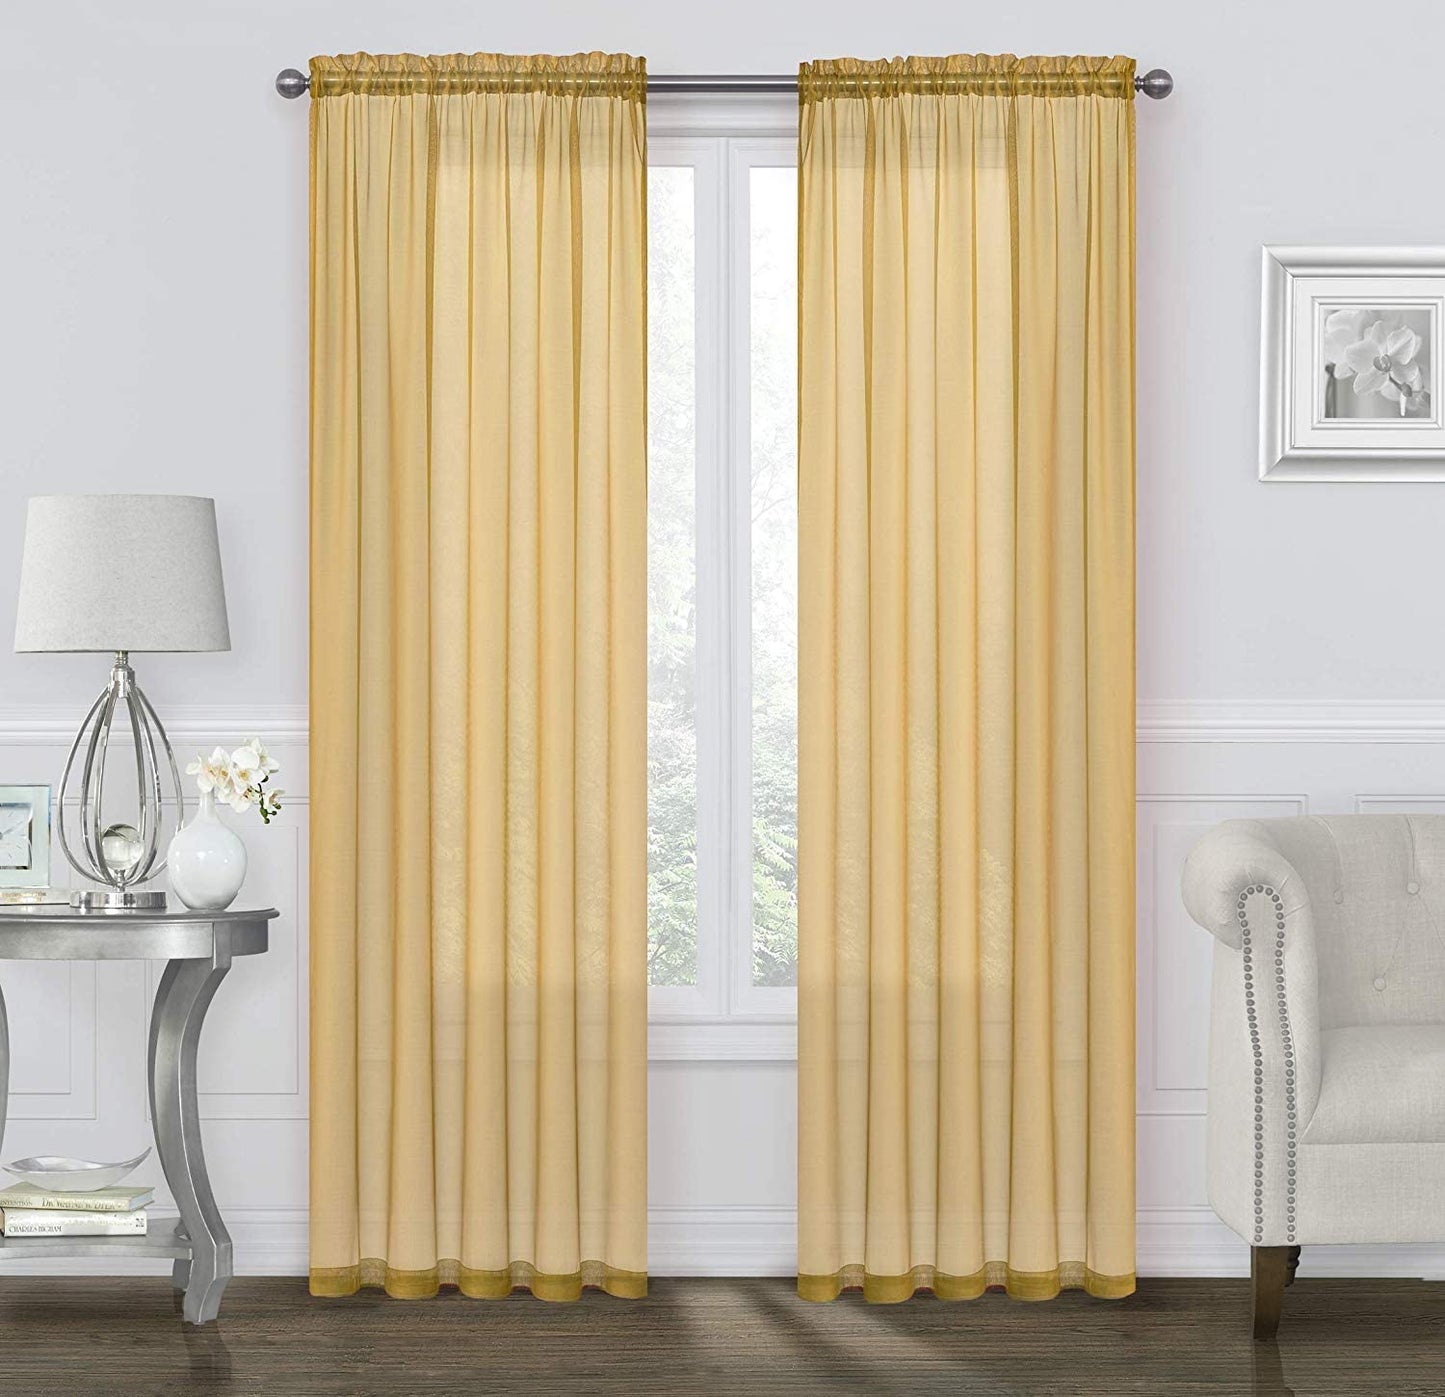 Goodgram 2 Pack: Basic Rod Pocket Sheer Voile Window Curtain Panels - Assorted Colors (White, 84 In. Long)  Goodgram Gold Contemporary 95 In. Long